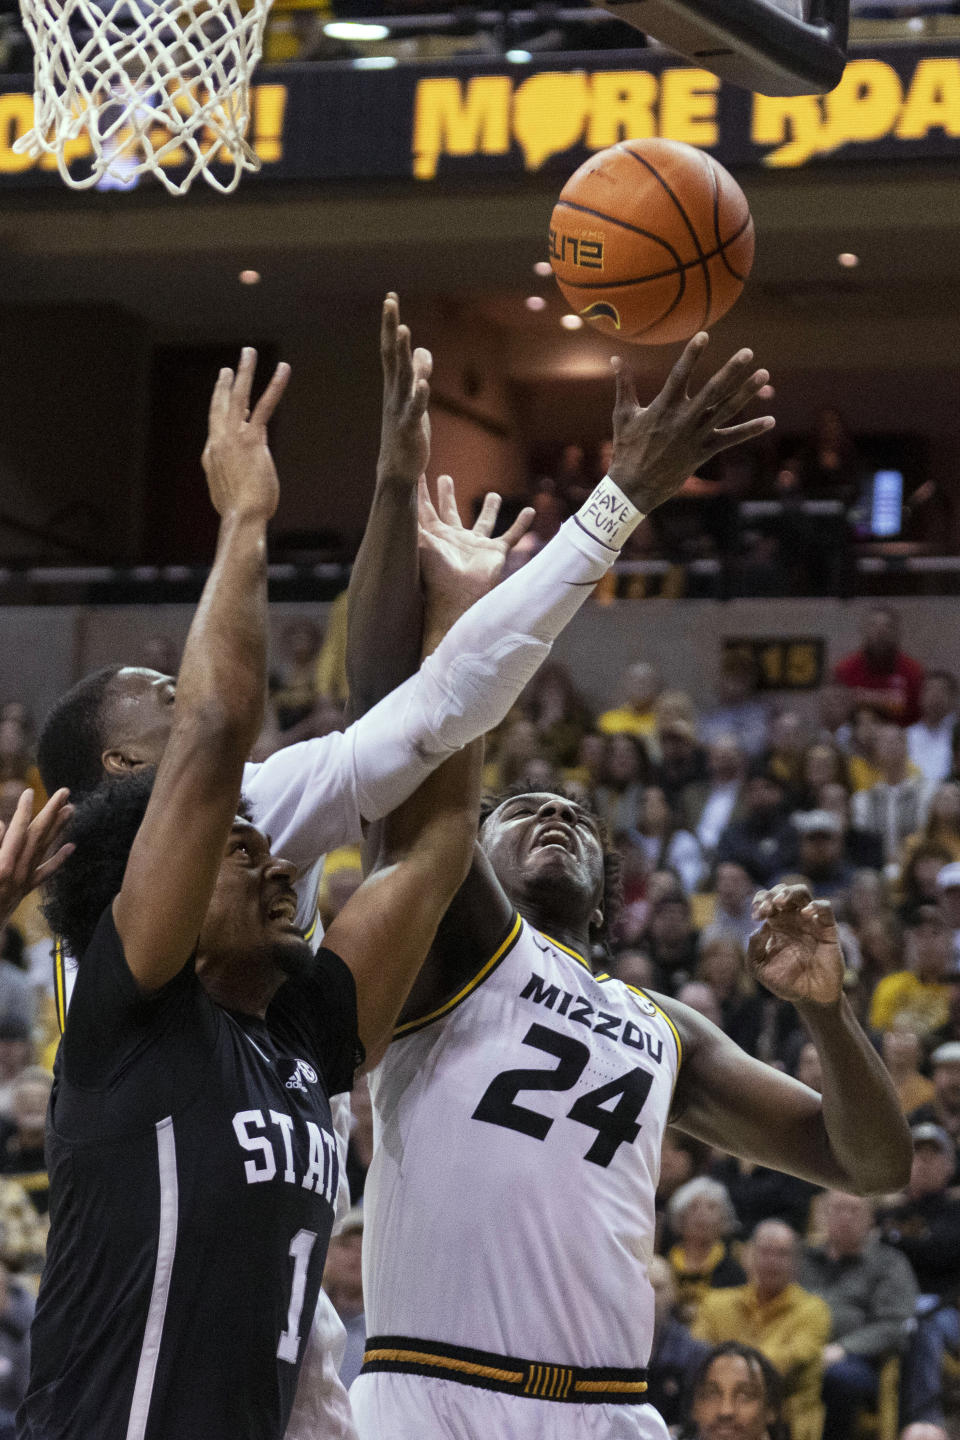 Missouri's Kobe Brown, right, and Mississippi State's Tolu Smith, left, reach for a rebound during the first half of an NCAA college basketball game Tuesday, Feb. 21, 2023, in Columbia, Mo. (AP Photo/L.G. Patterson)